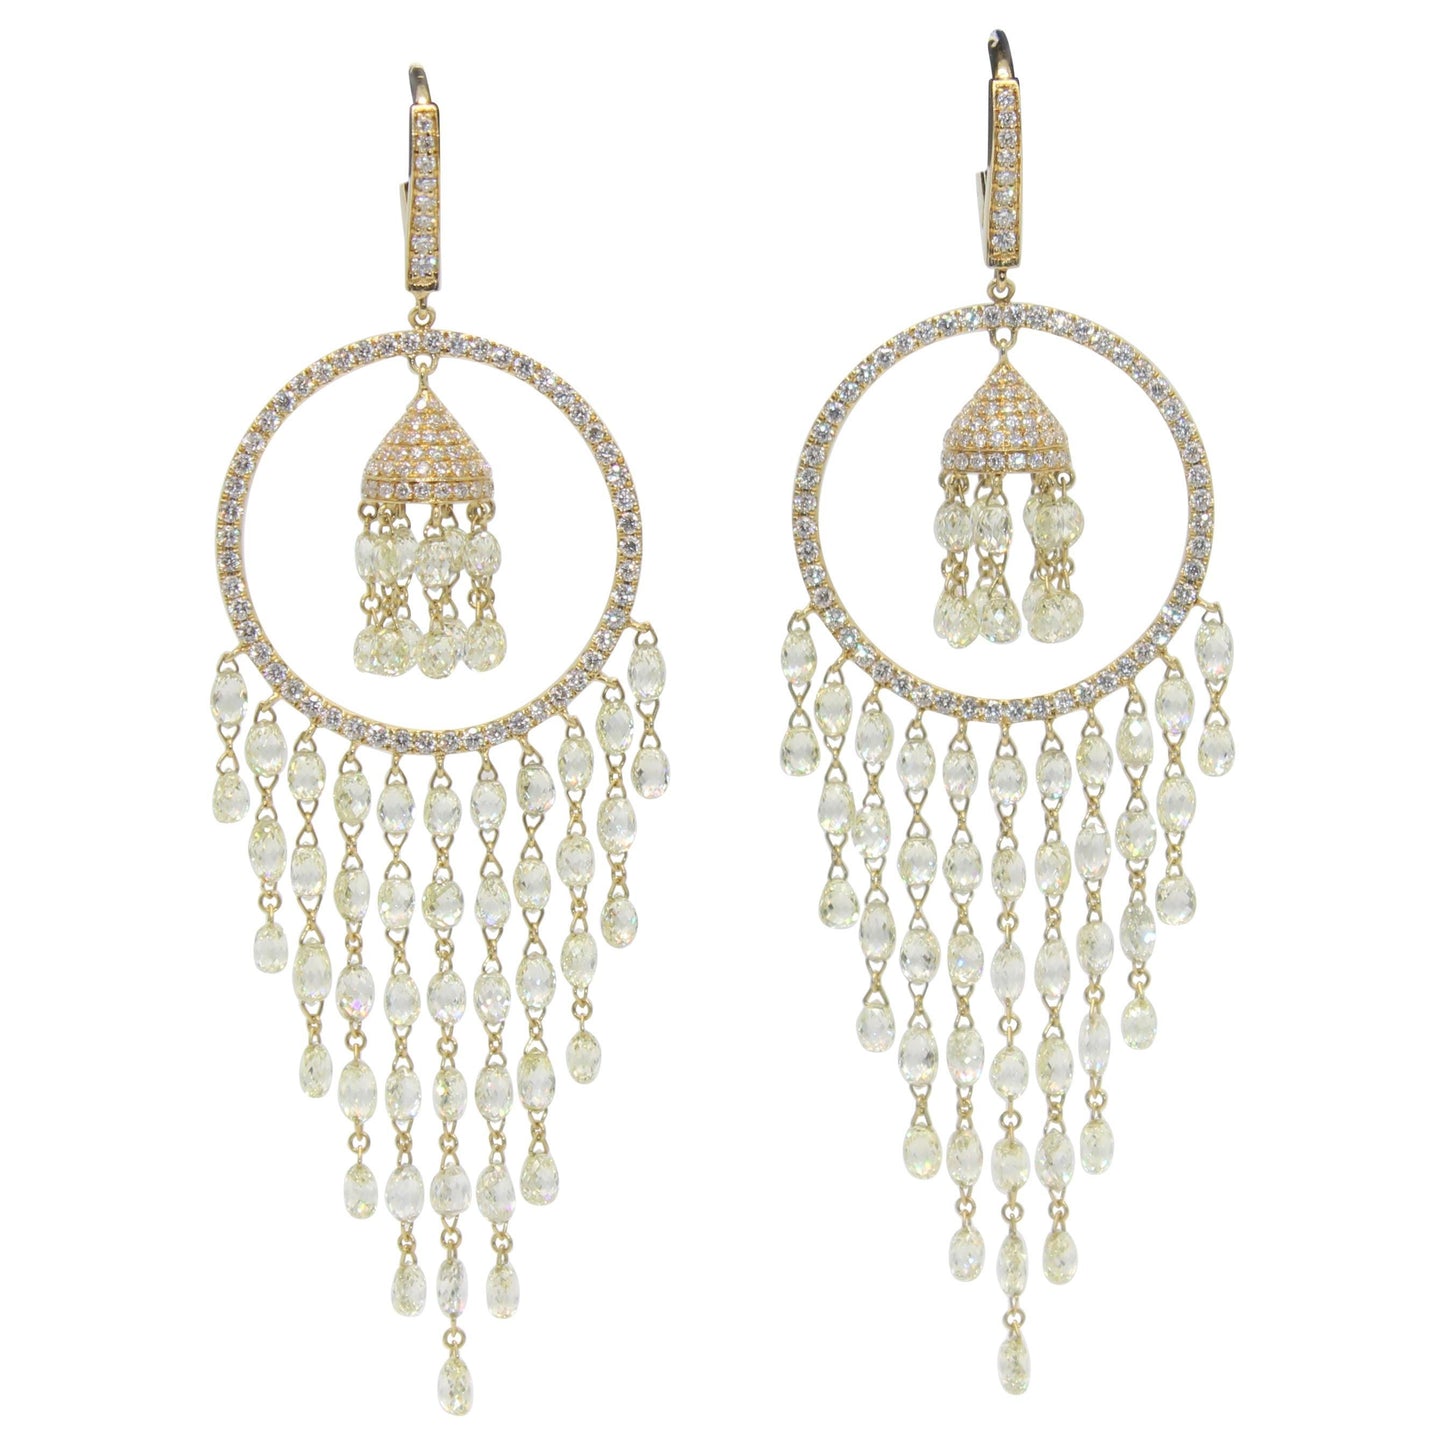 22.41cts Diamond Briolette Earrings, Yellow Gold